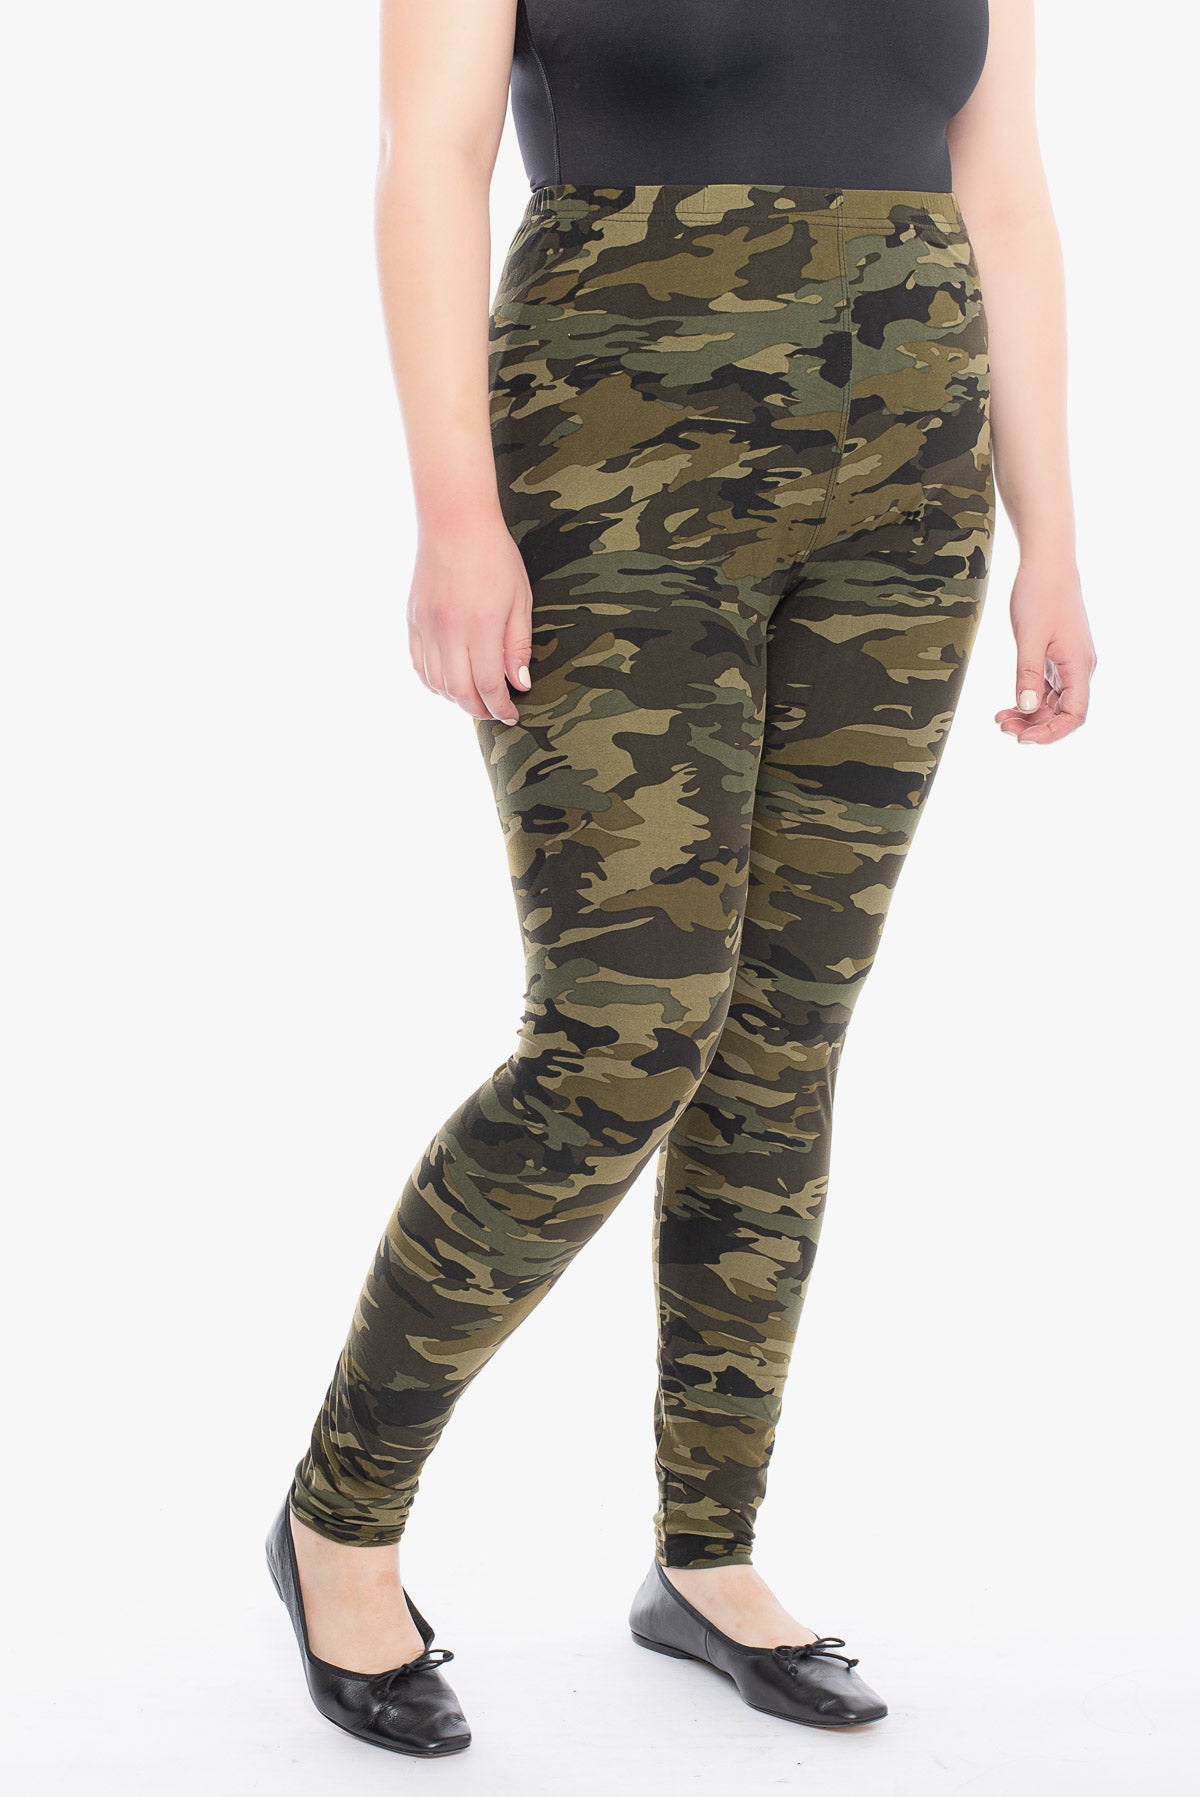 Lilly - camouflage olive